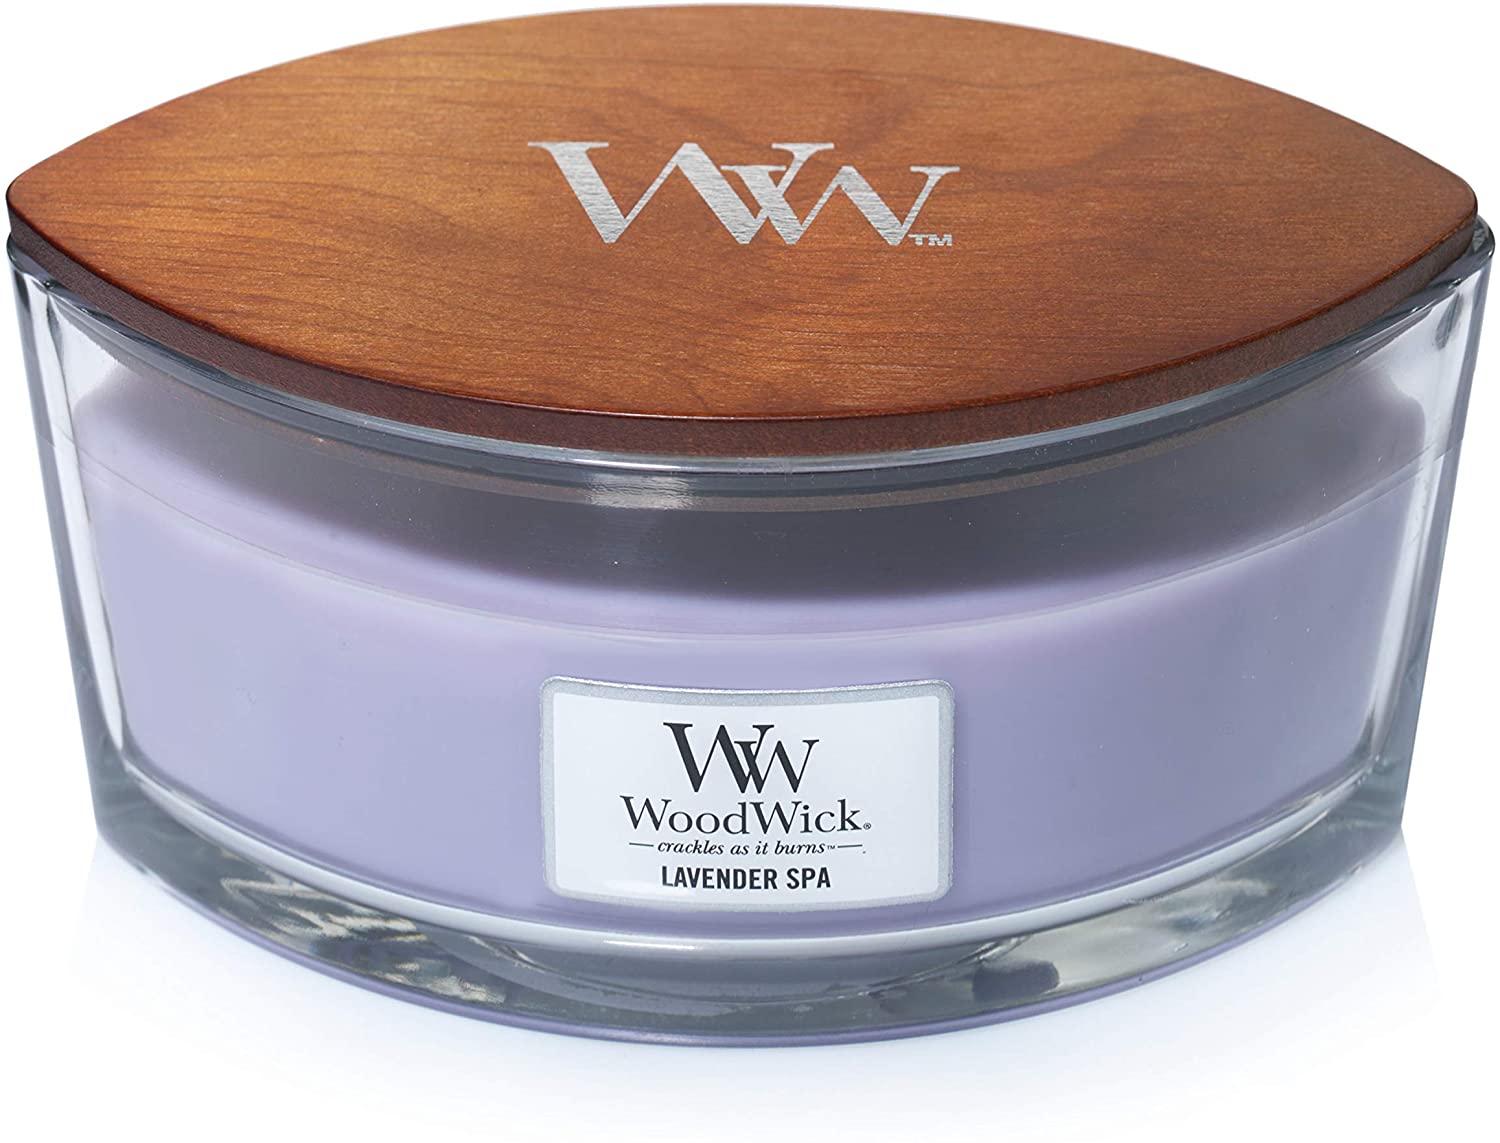 Woodwick At The Beach Scented Elliptical-Shaped Candle